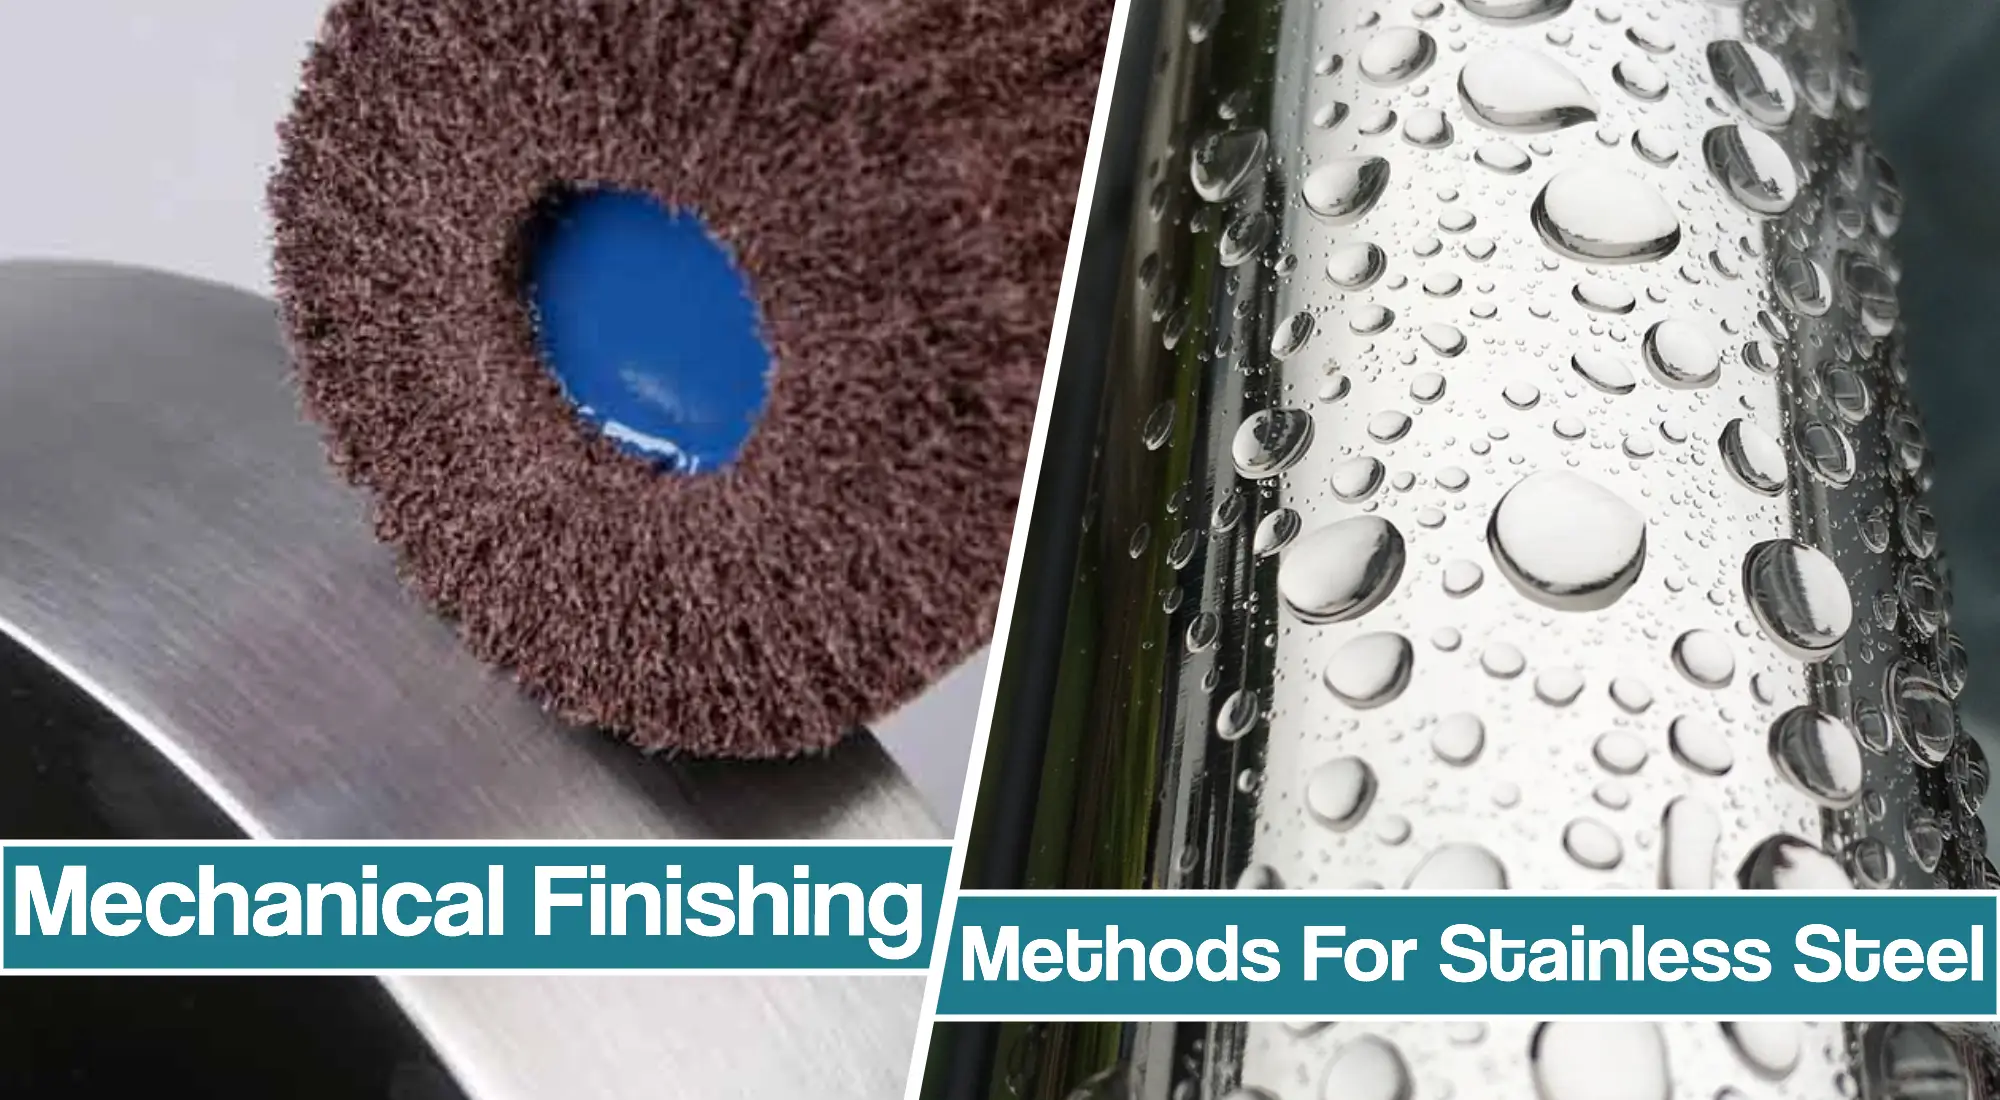 Mechanical Finishing of Stainless Steel – Tools, Tips and Methods